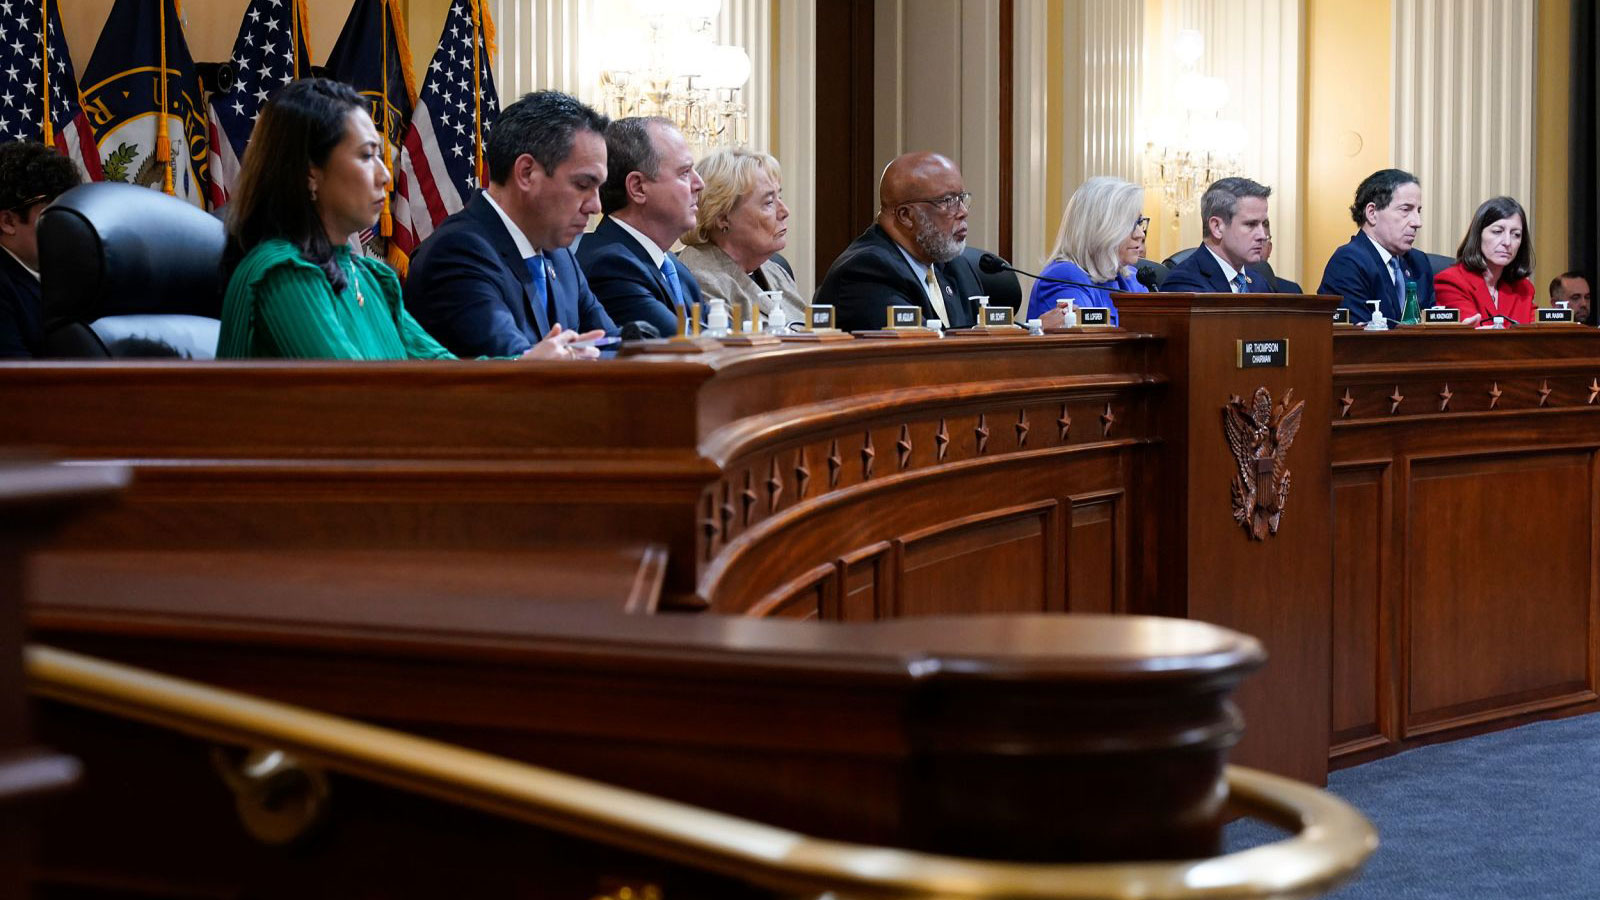 The House select committee is seated at the start of last week's hearing.